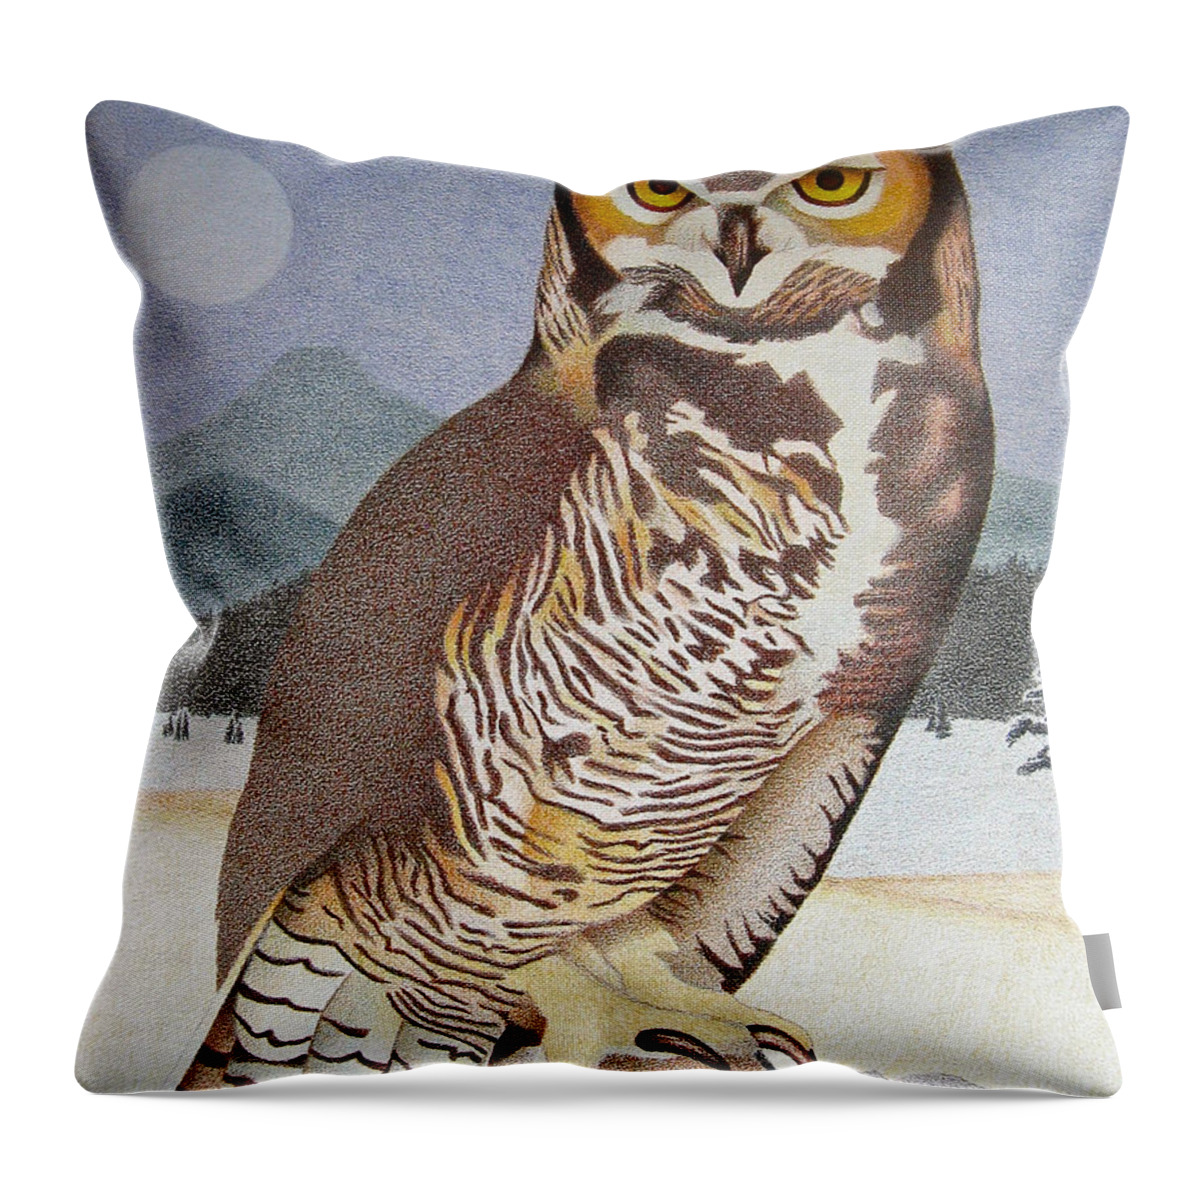 Art Throw Pillow featuring the drawing Great Horned Owl by Dan Miller